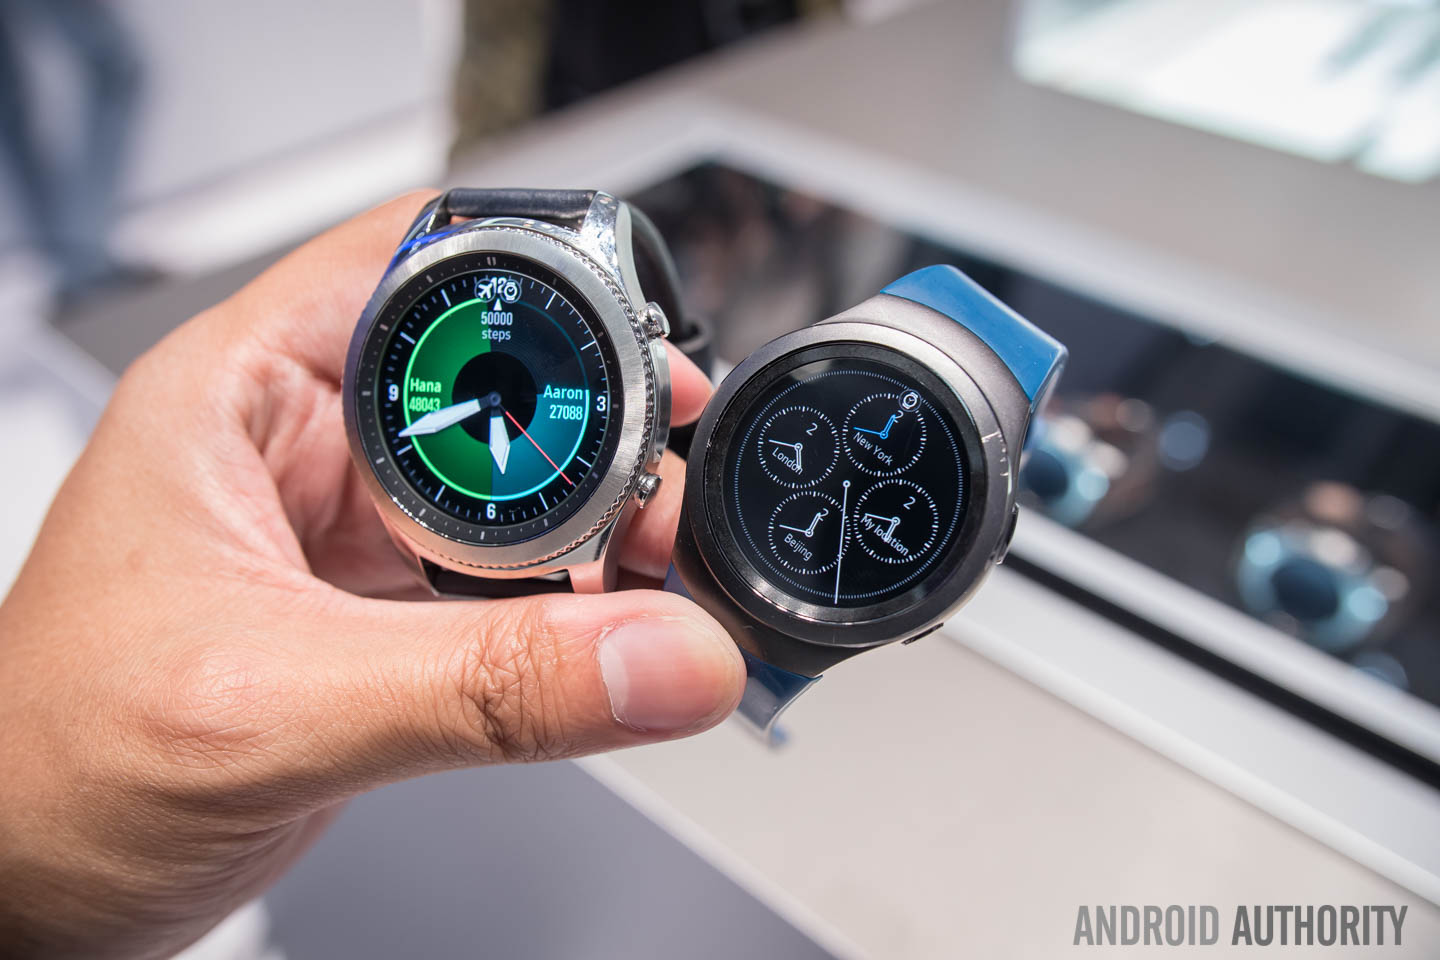 Samsung S3 vs Gear S2 - Android